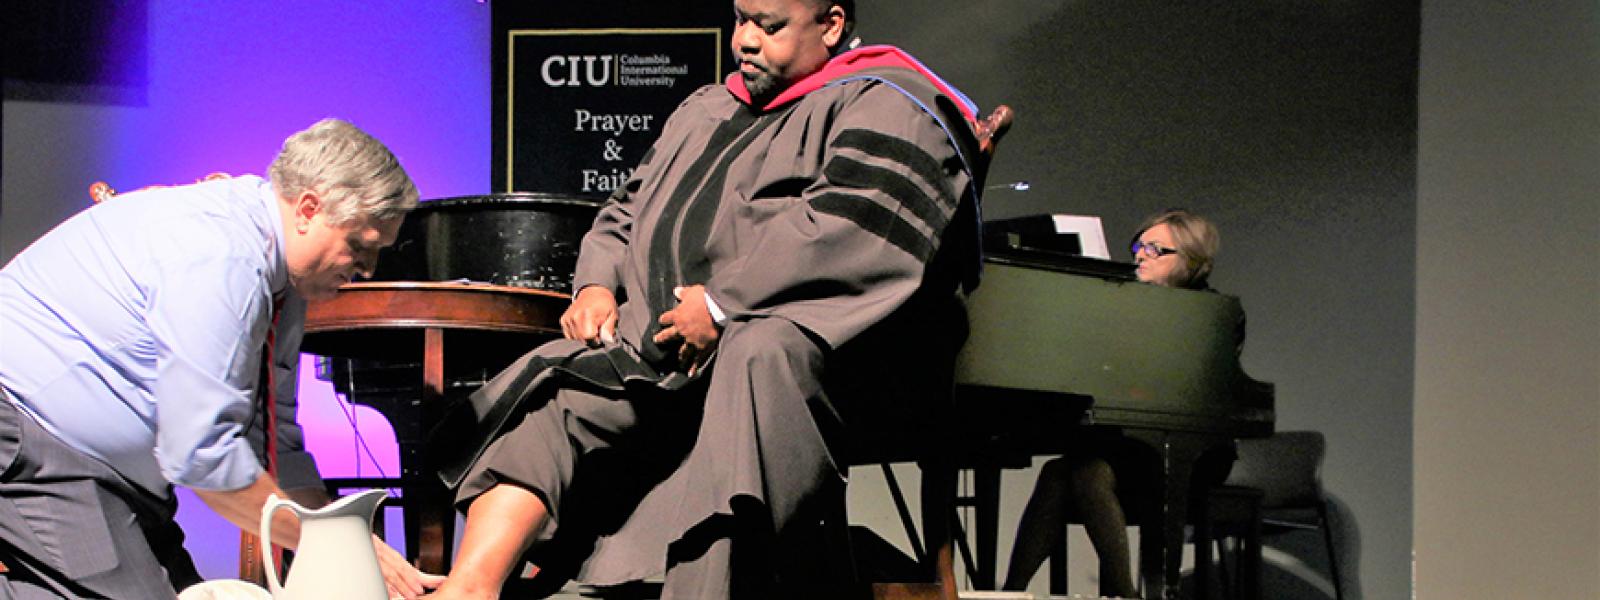 CIU President Dr. Mark Smith washes the feet of CIU Professor Dr. Andre Rogers at CIU's 2019 Convocation